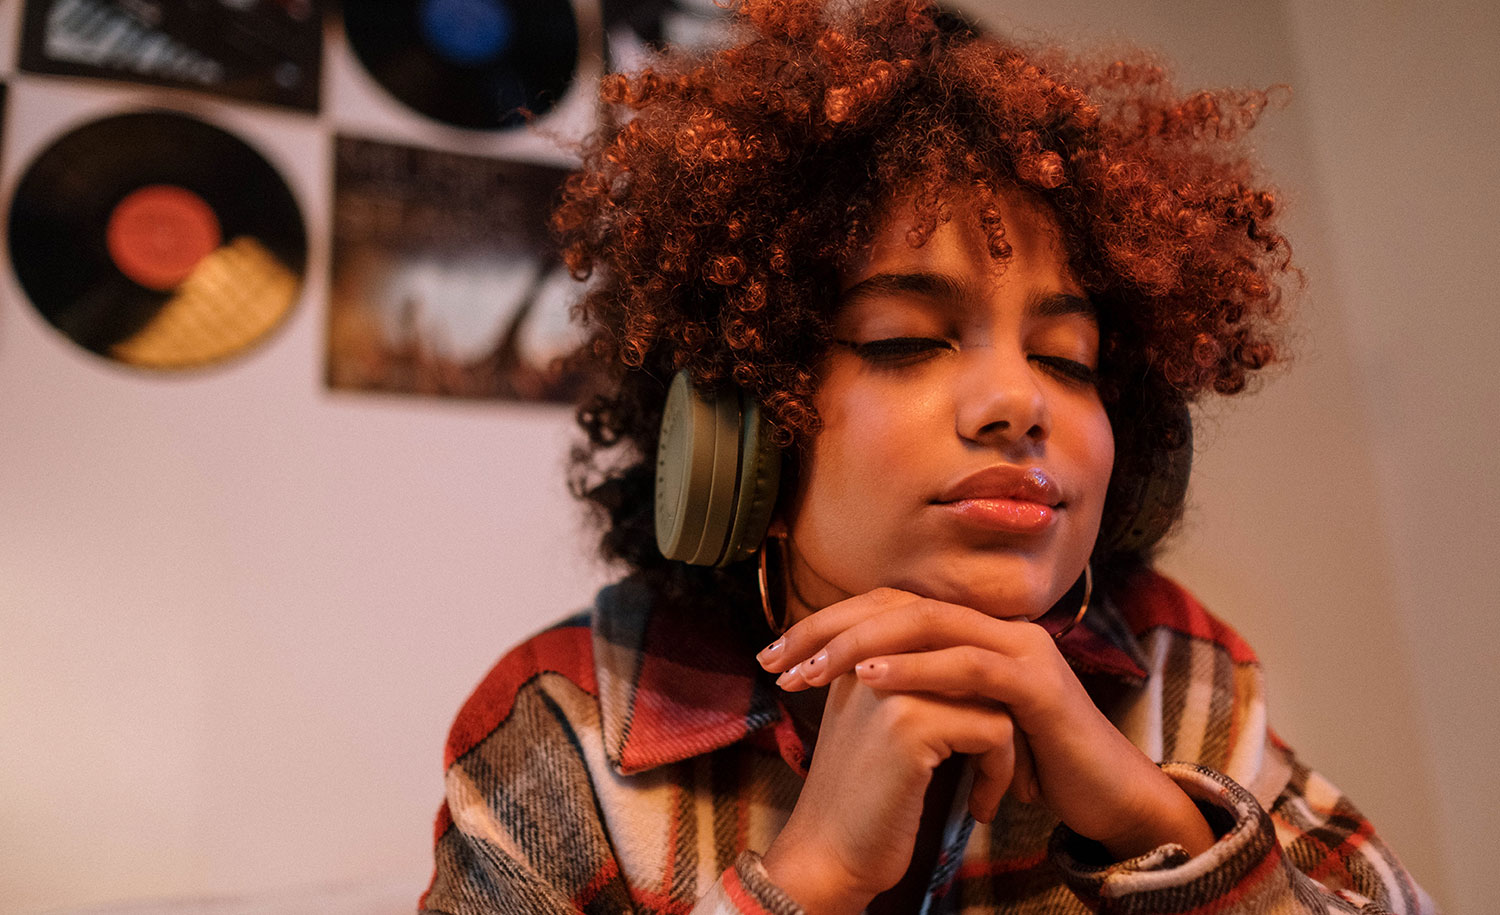 A highly sensitive woman relaxes and listens to music